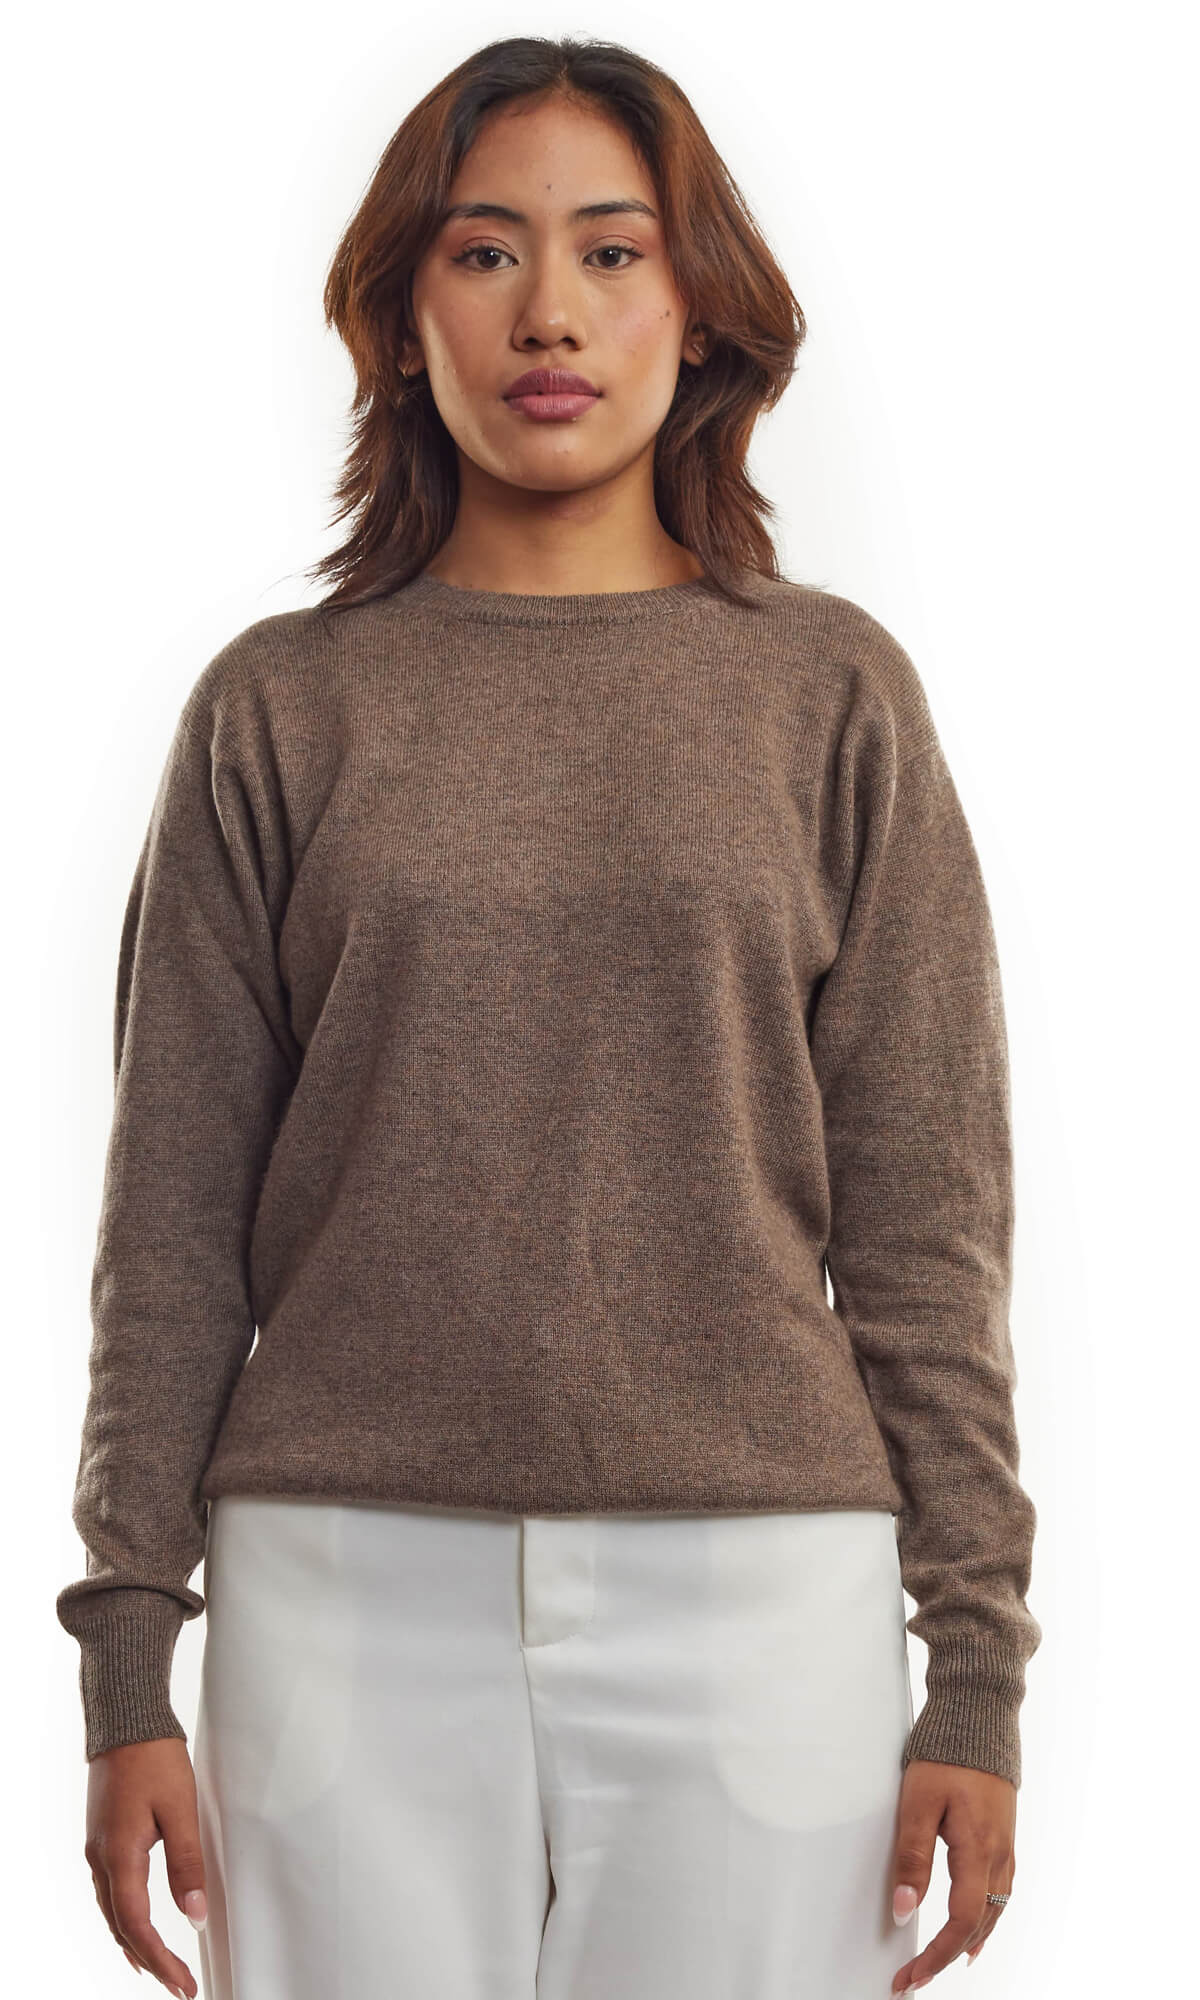 Pure Cashmere Cardigan Roundneck in Rich Coffee Hue